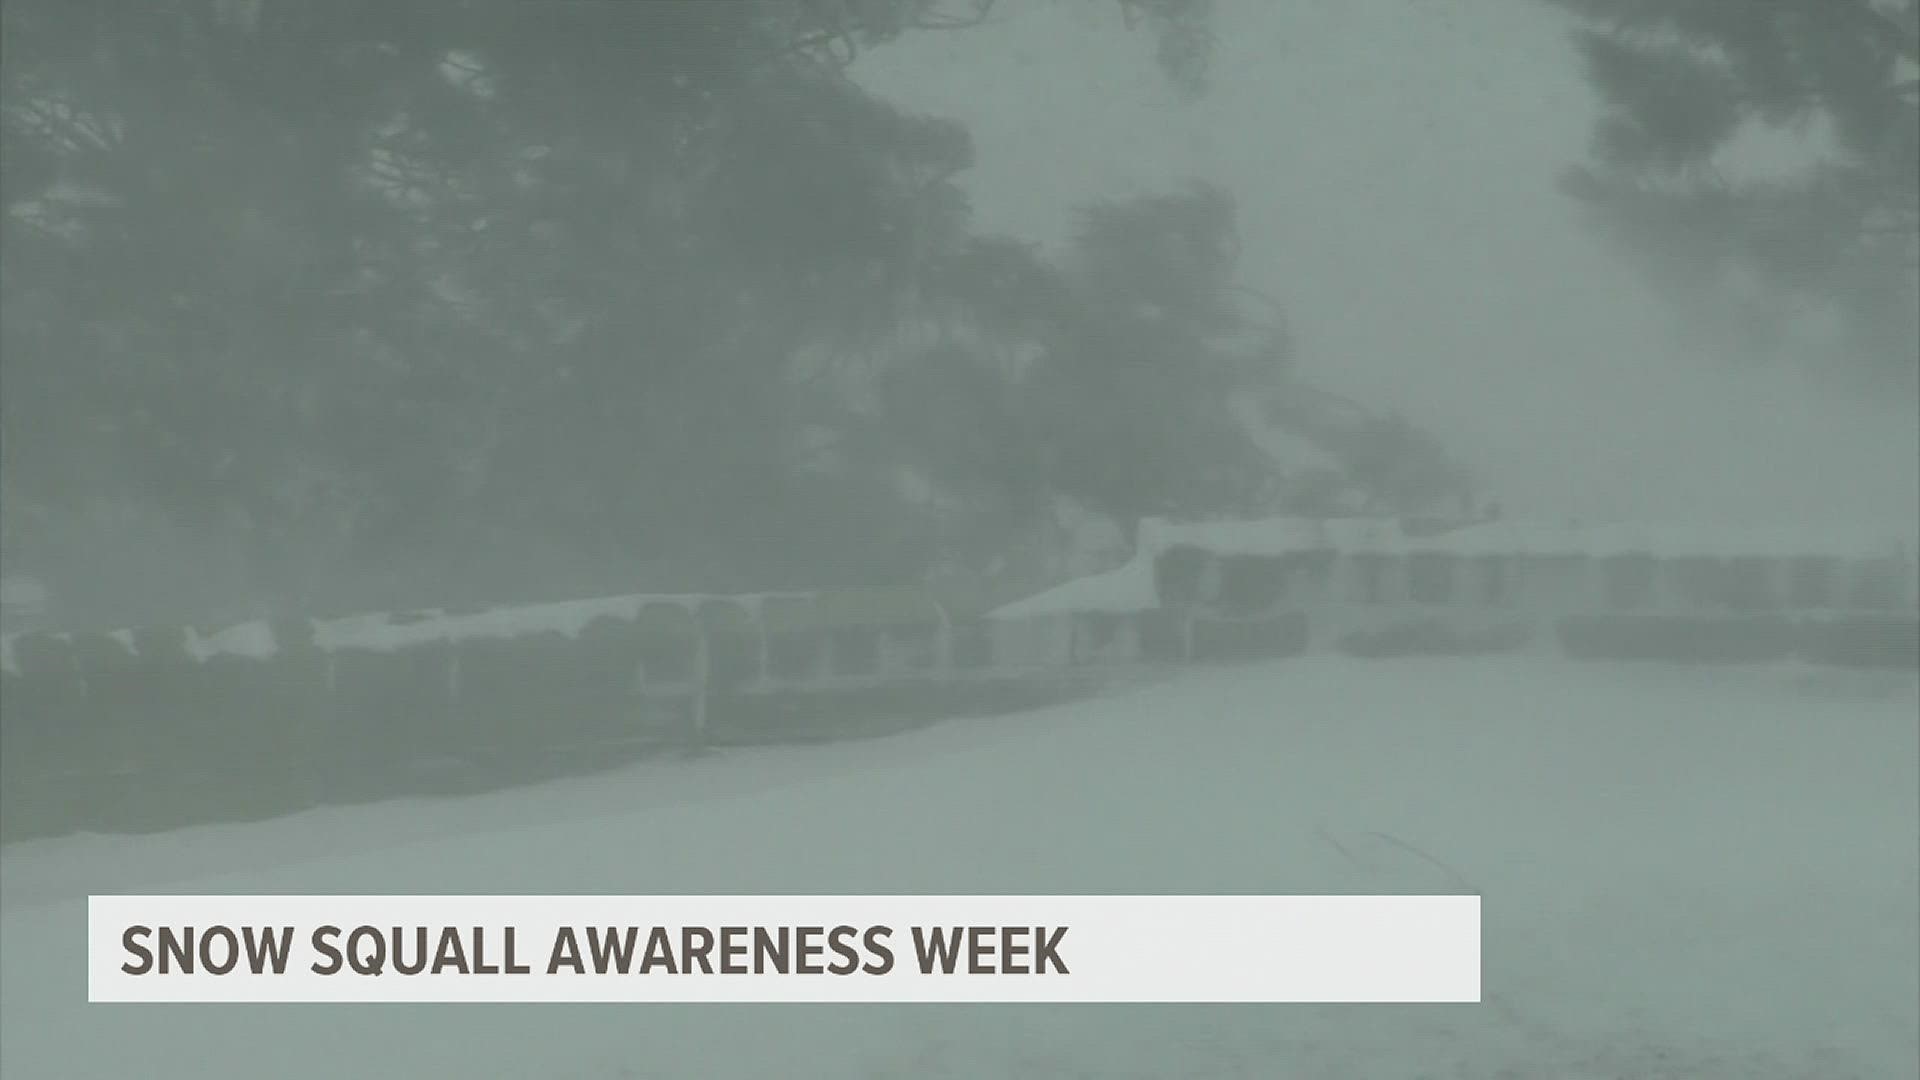 It is snow squall awareness week, and the National Weather Service and state officials teamed up to provide information about alerts and warnings.